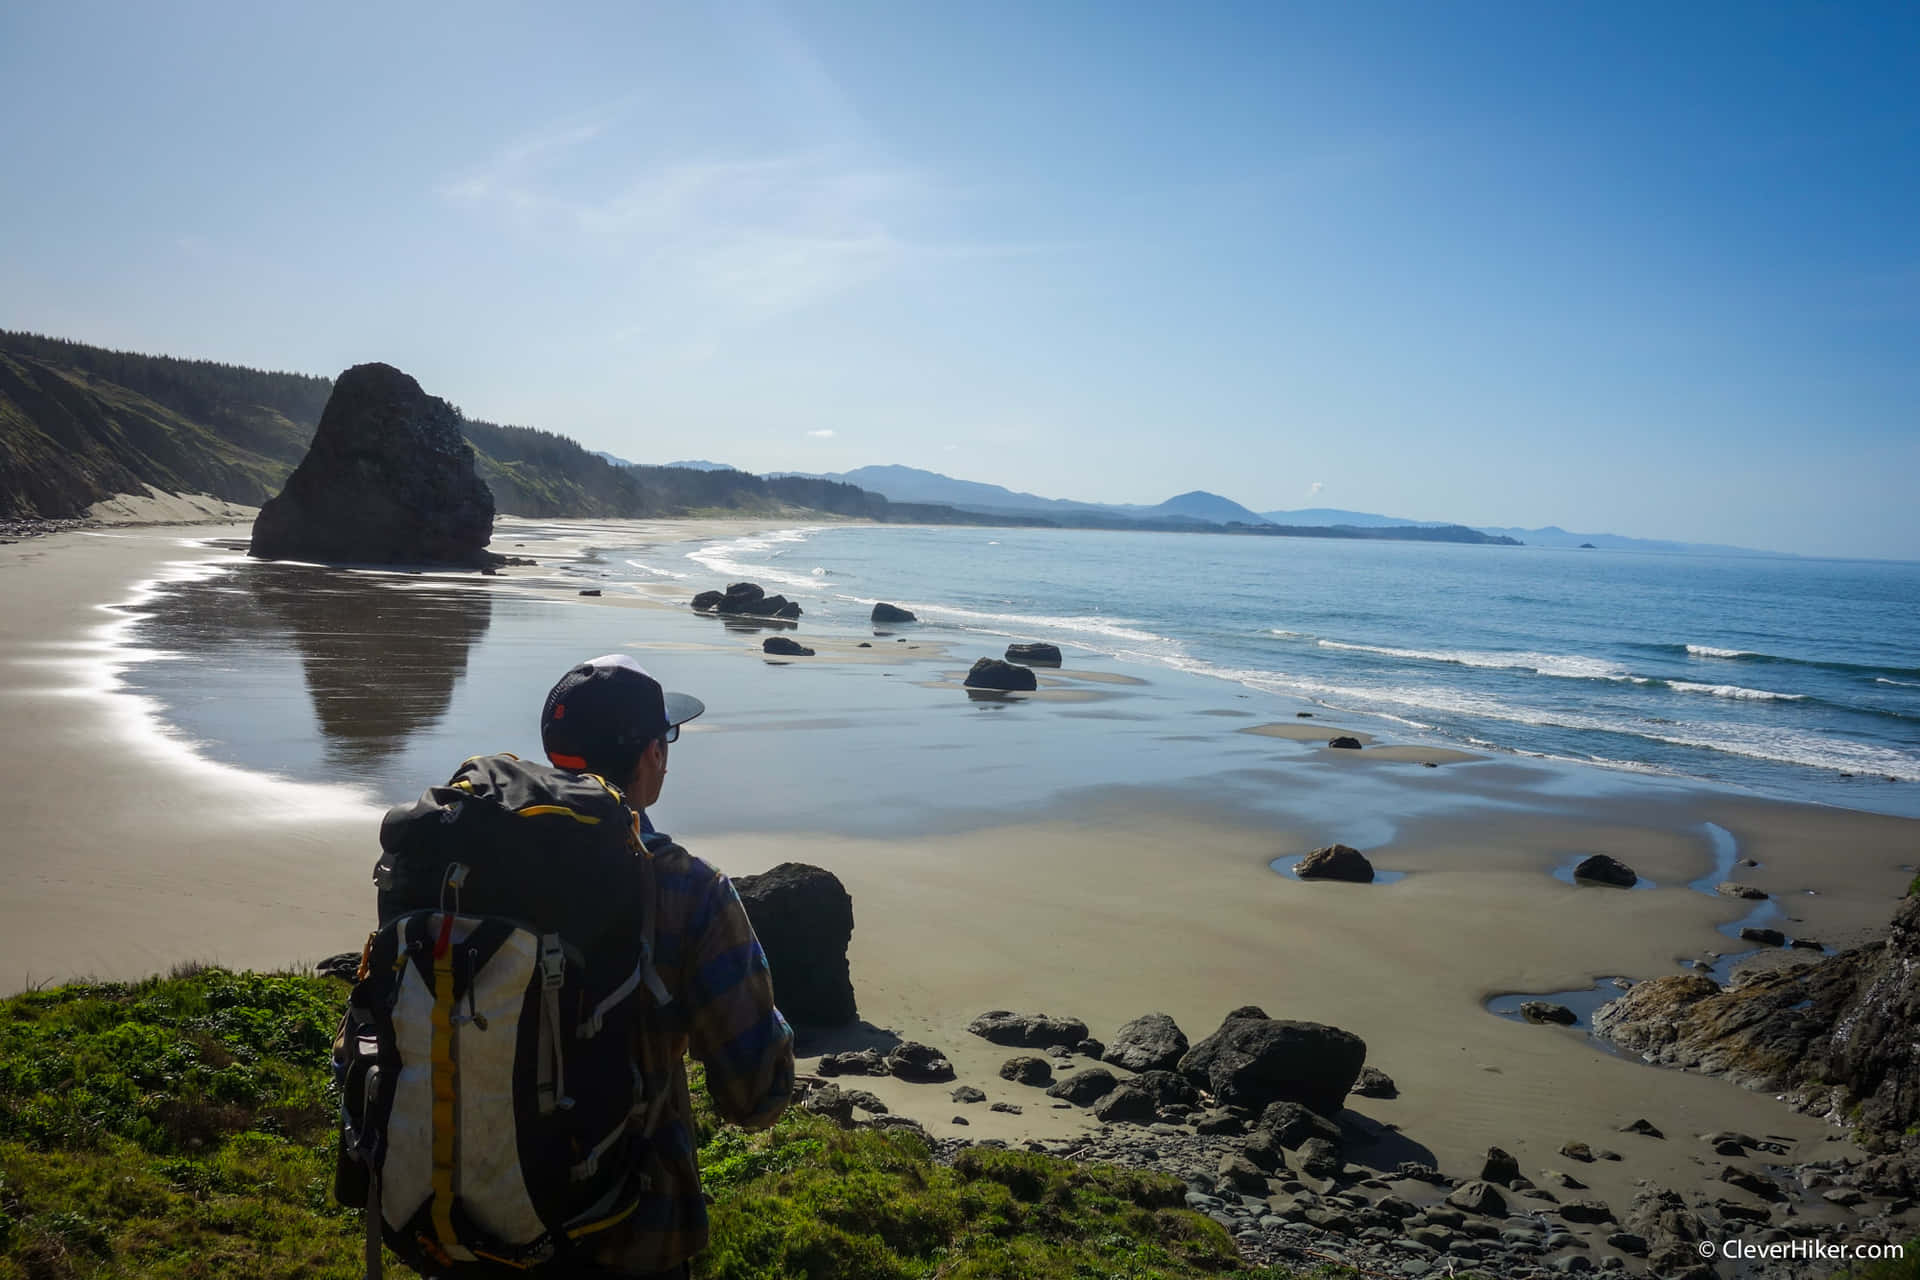 Take in the dramatic views of the Oregon Coast